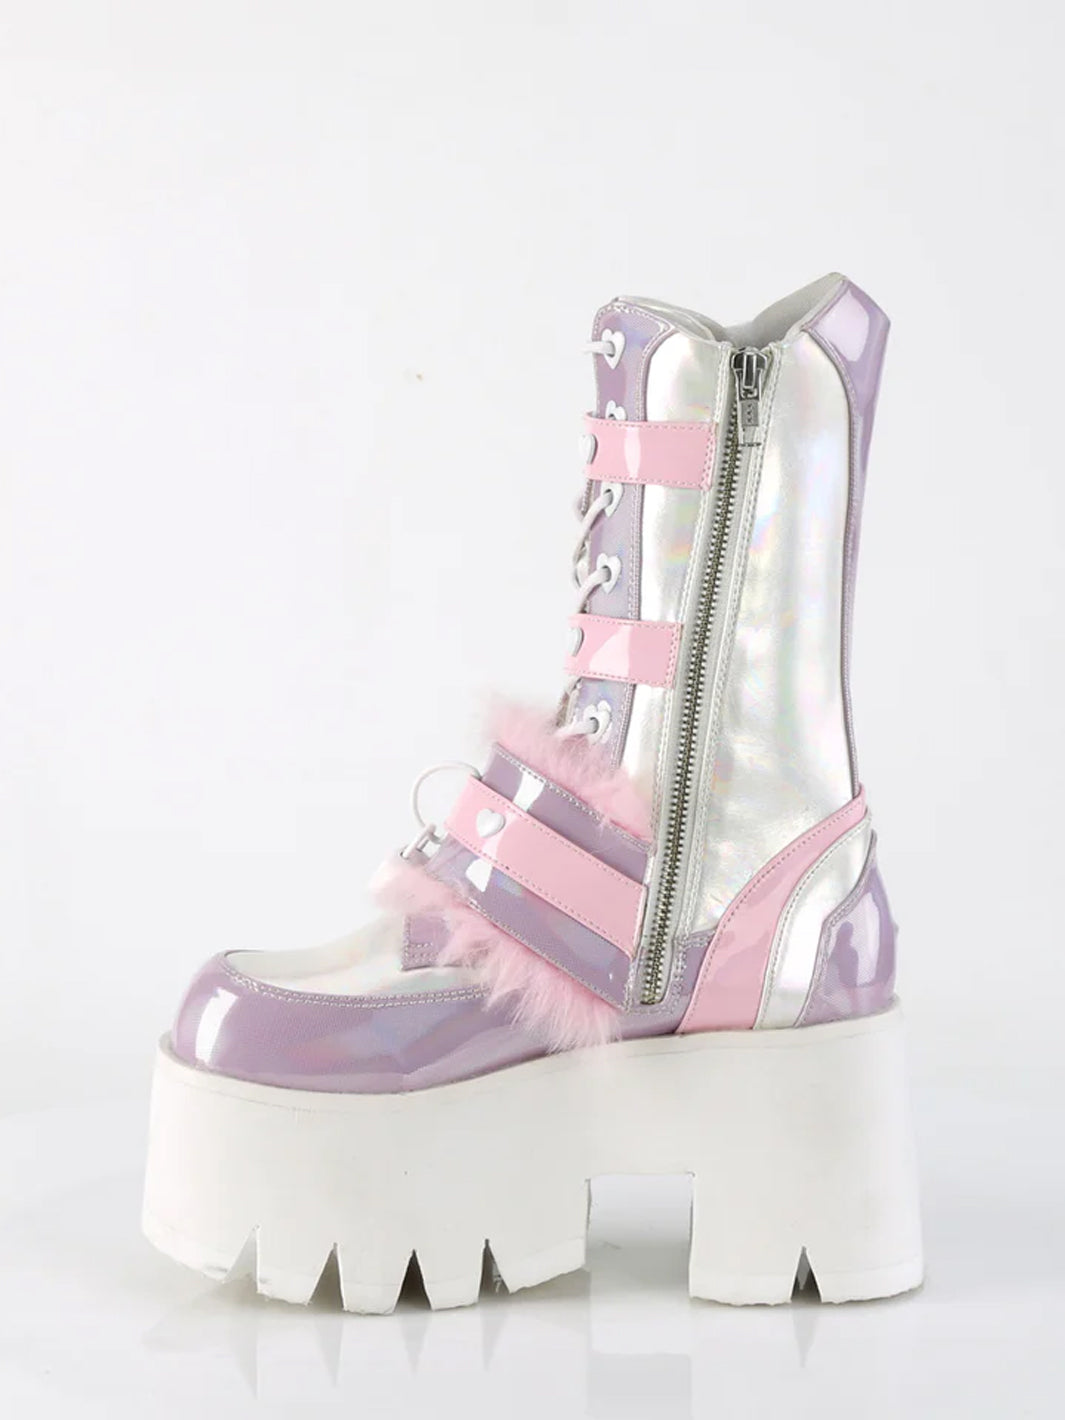 DEMONIA ASHES-120 BOOTS - PINK LAVENDER ✰ PRE ORDER ✰